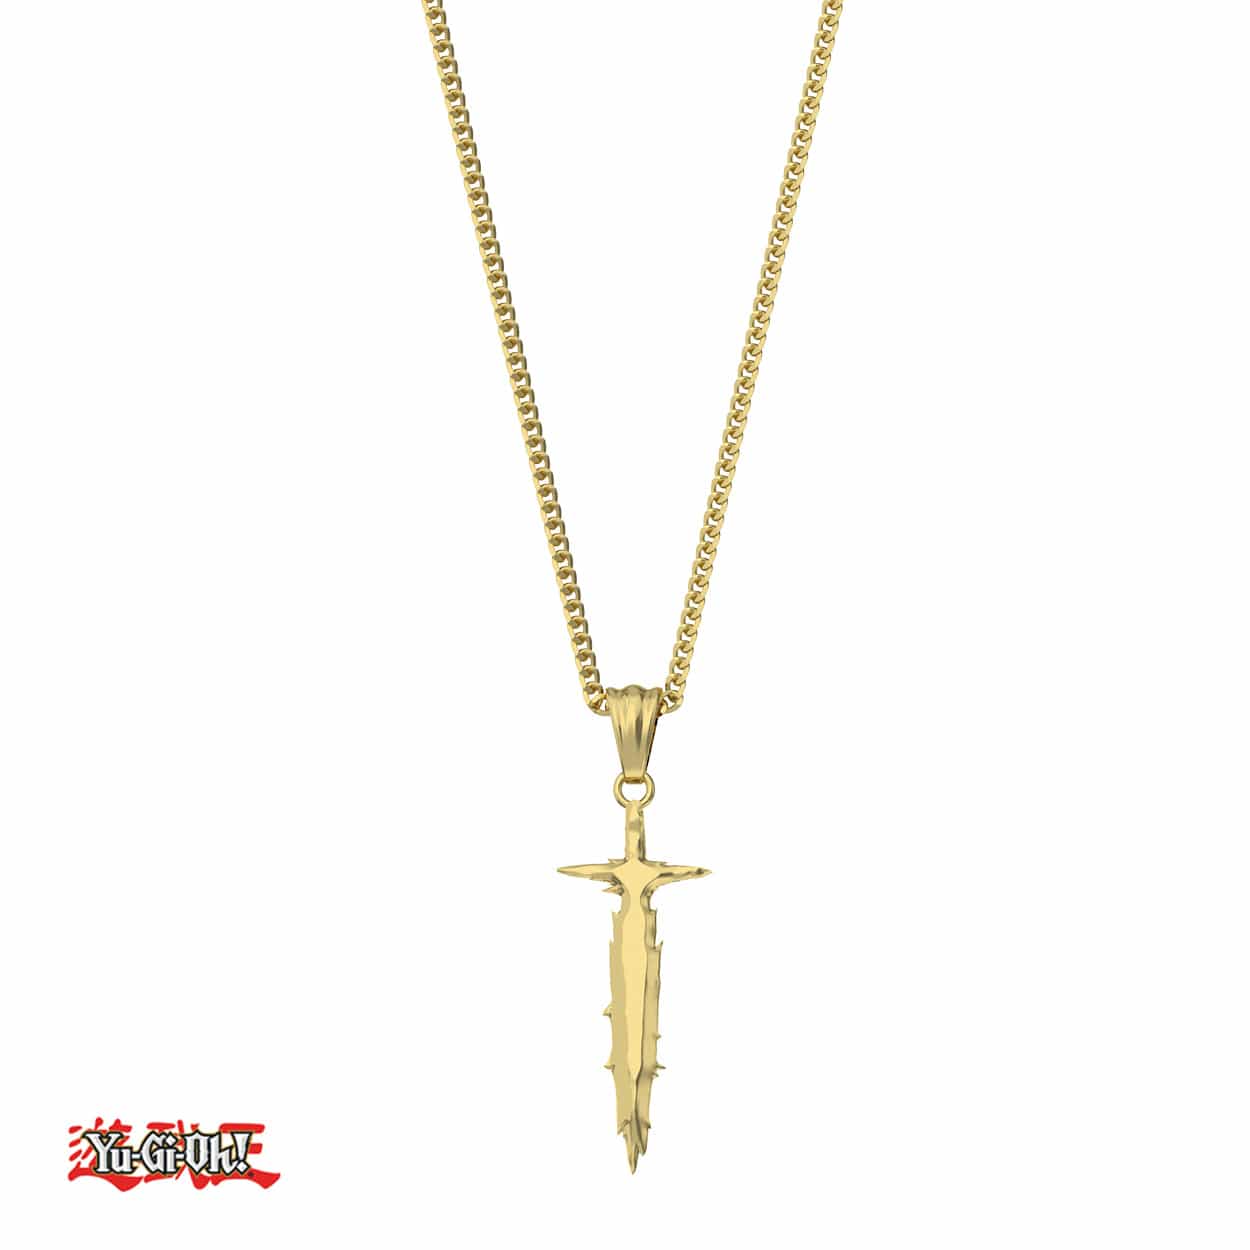 Yu-Gi-Oh!™ Sword Of Revealing Light Necklace